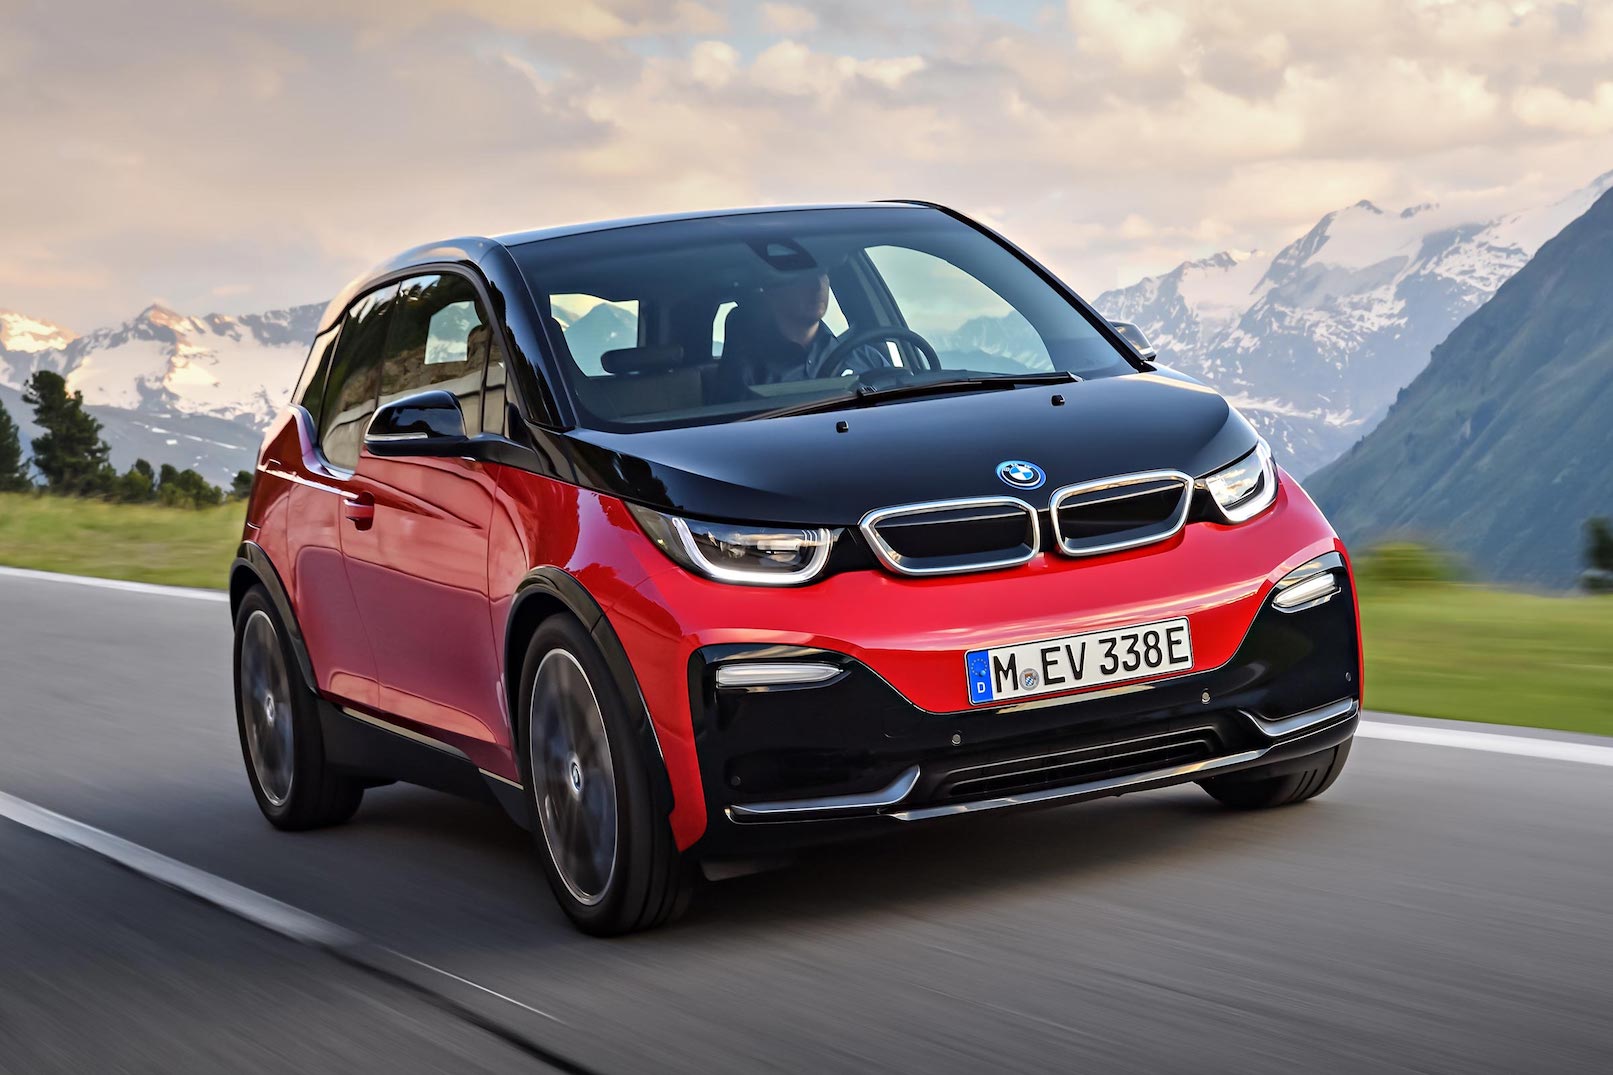 The BMW i3: Electric Car That Redefined Urban Mobility